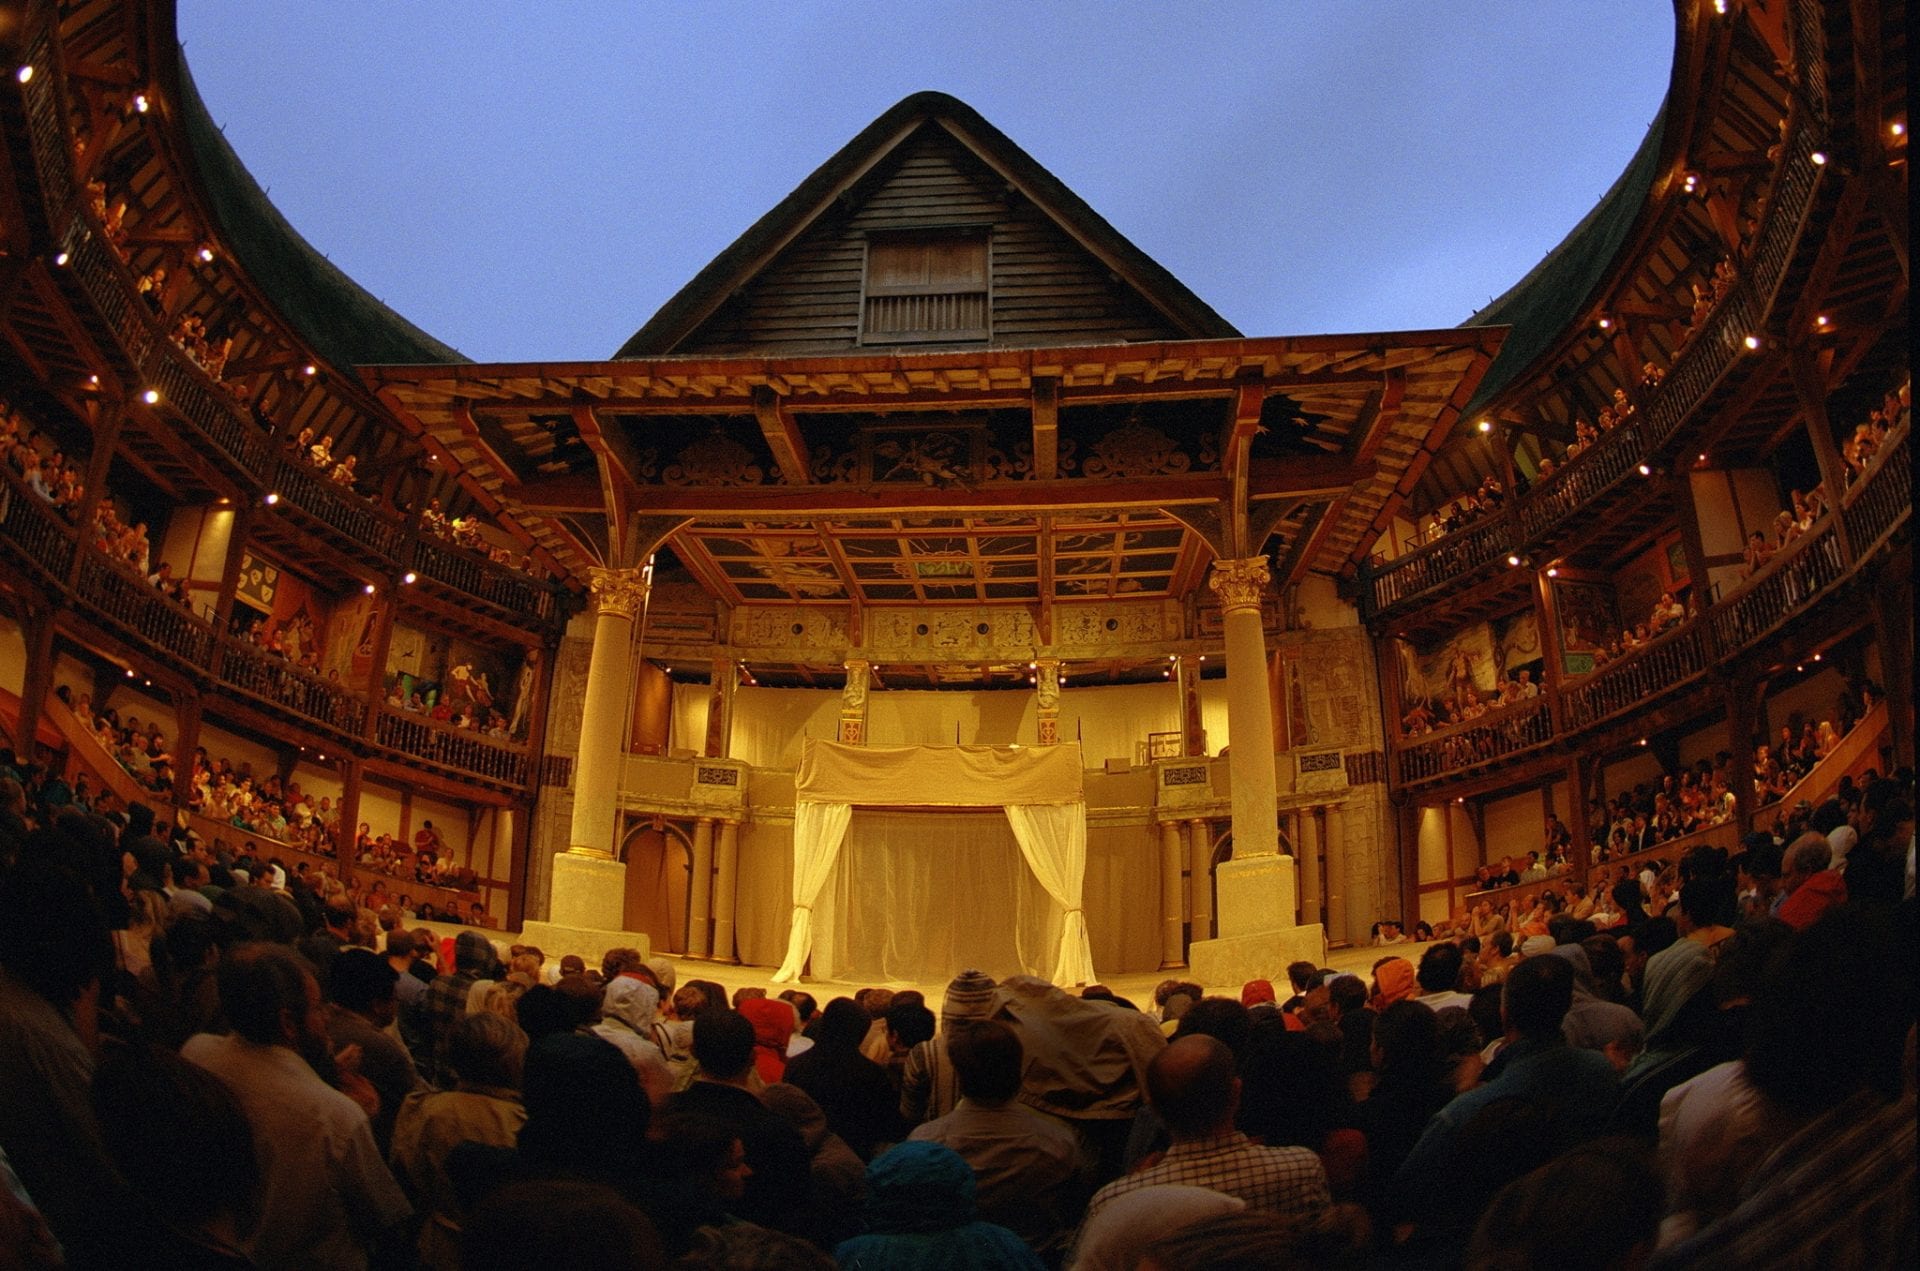 Interiot shot of the stage at Shakespeare' Globe Theatre today, by night